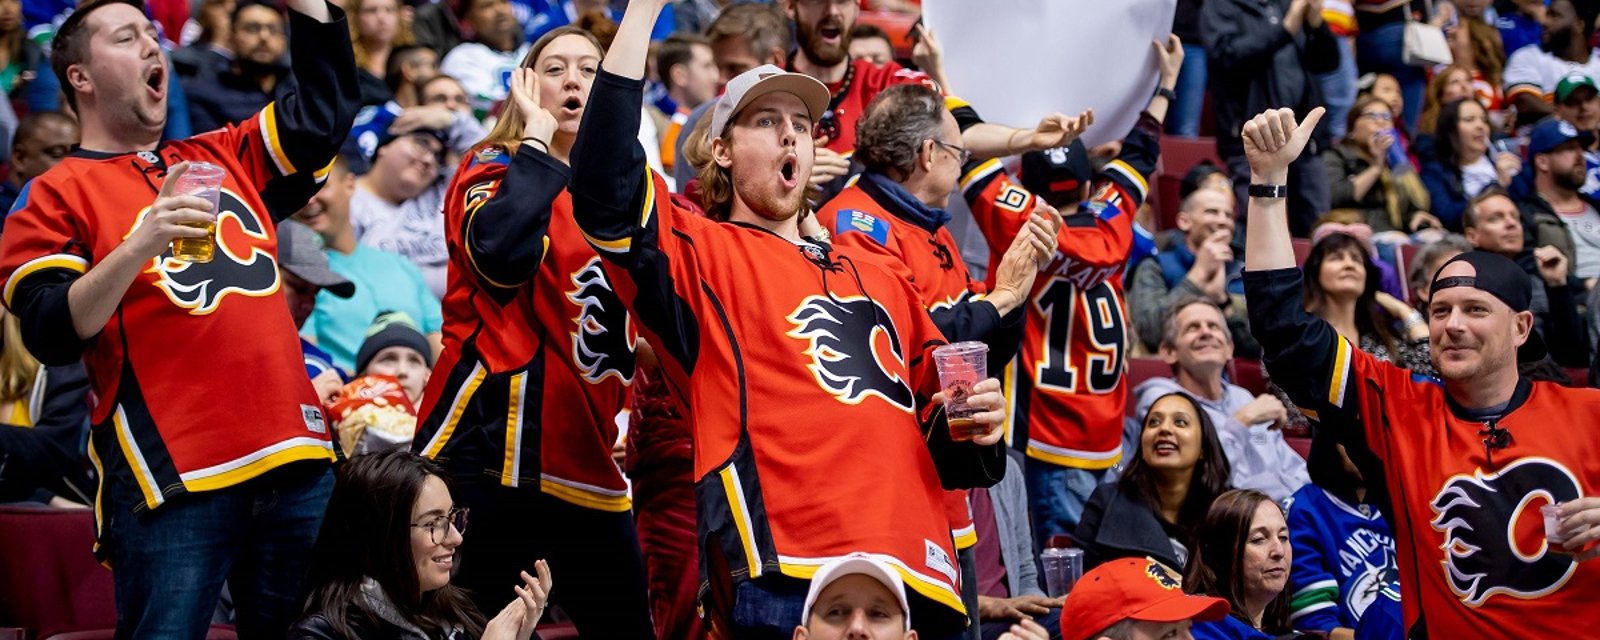 City of Calgary makes massive cuts to social services one day after endorsing a new arena. 